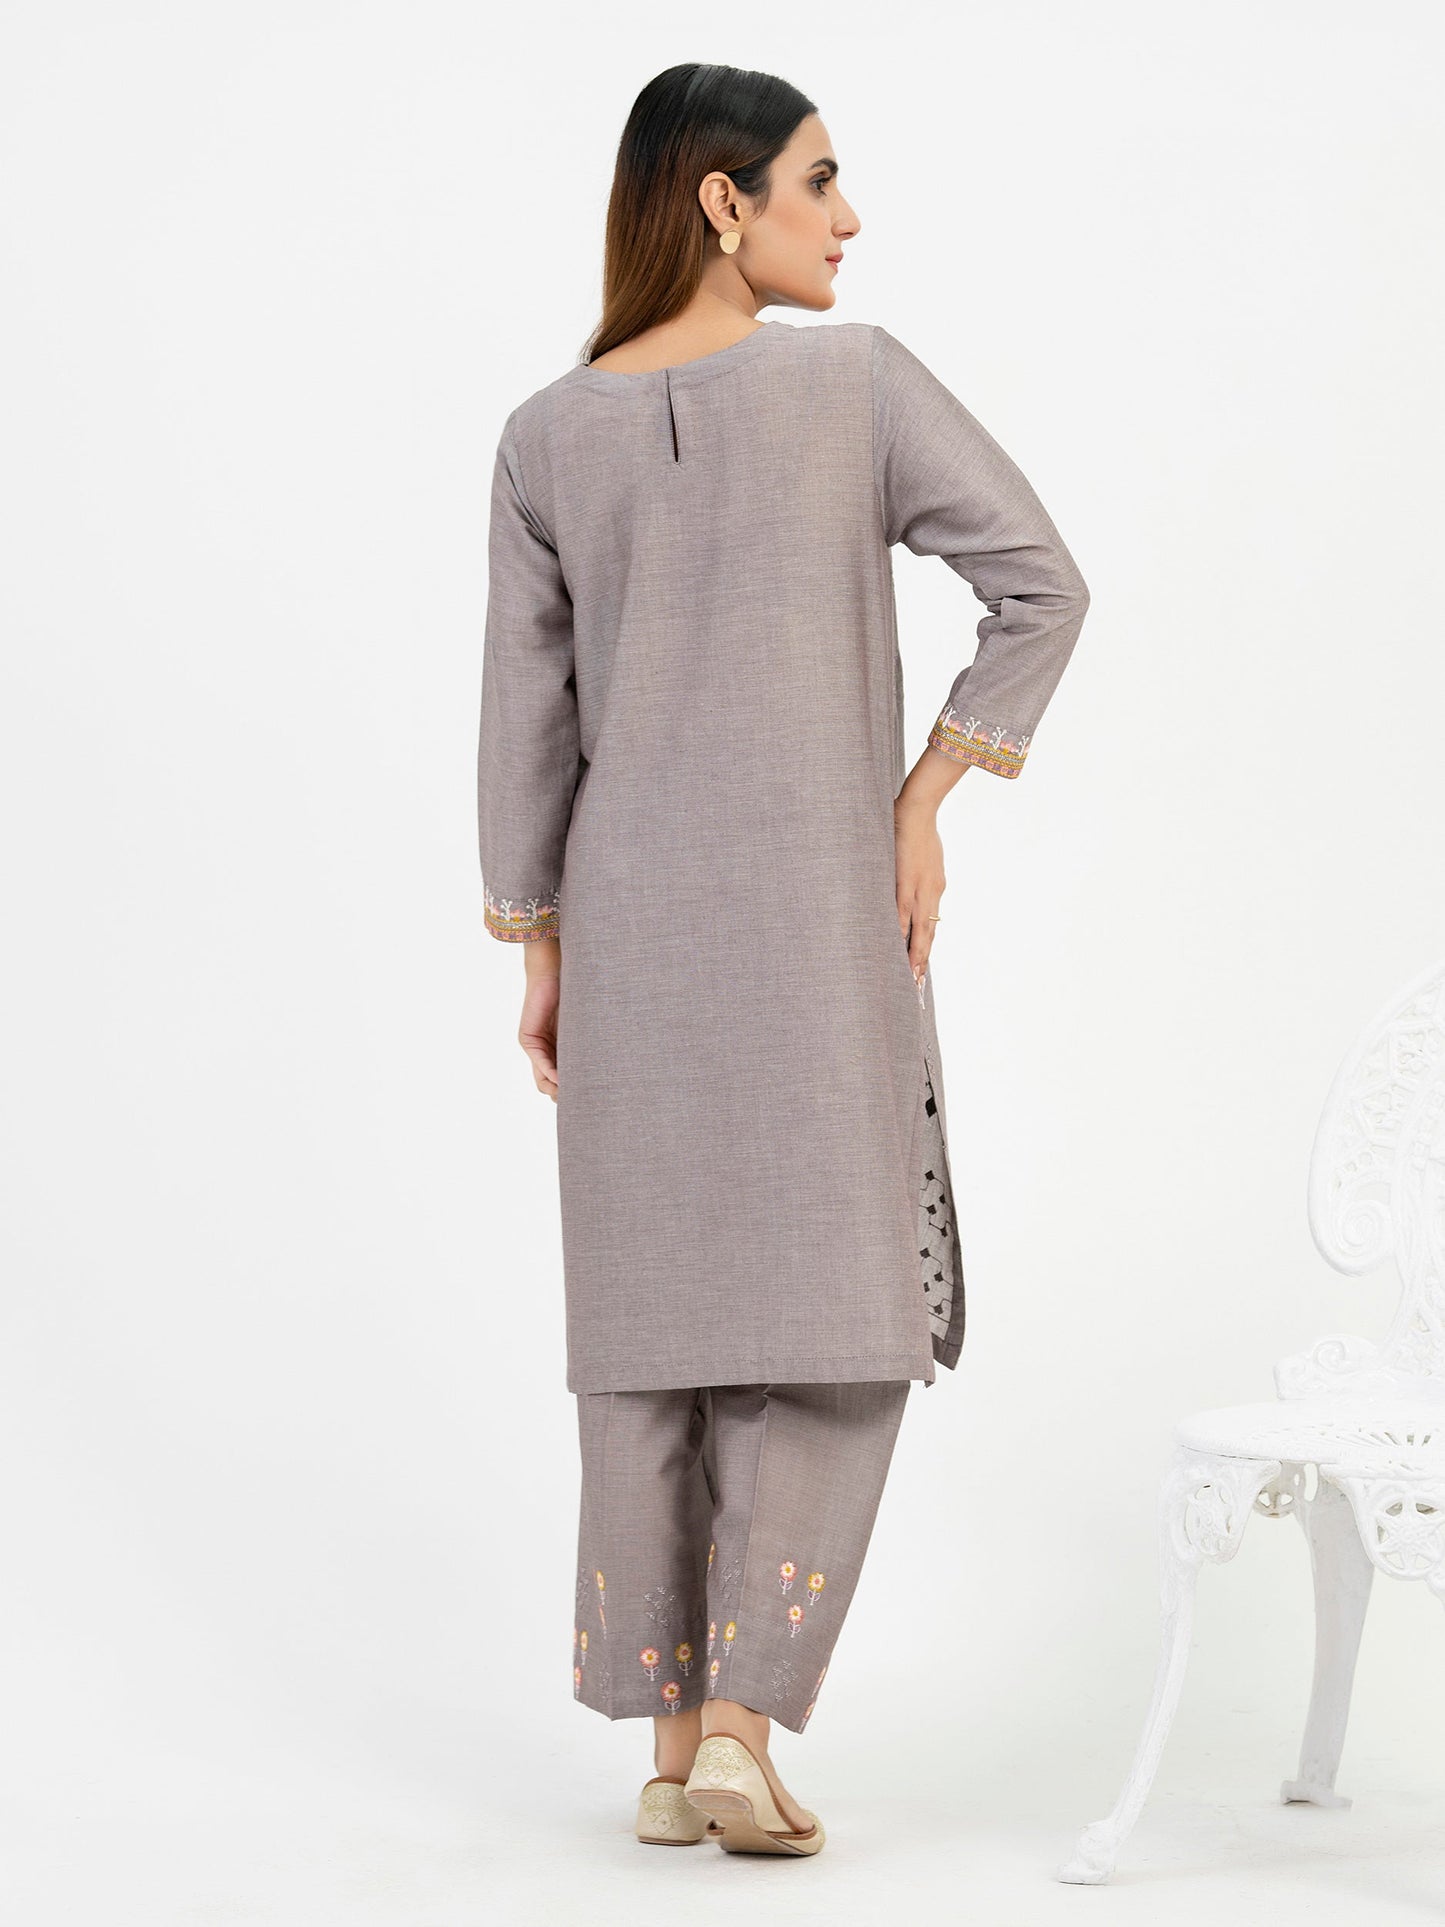 2 Piece Yarn Dyed Suit-Embroidered (Pret)